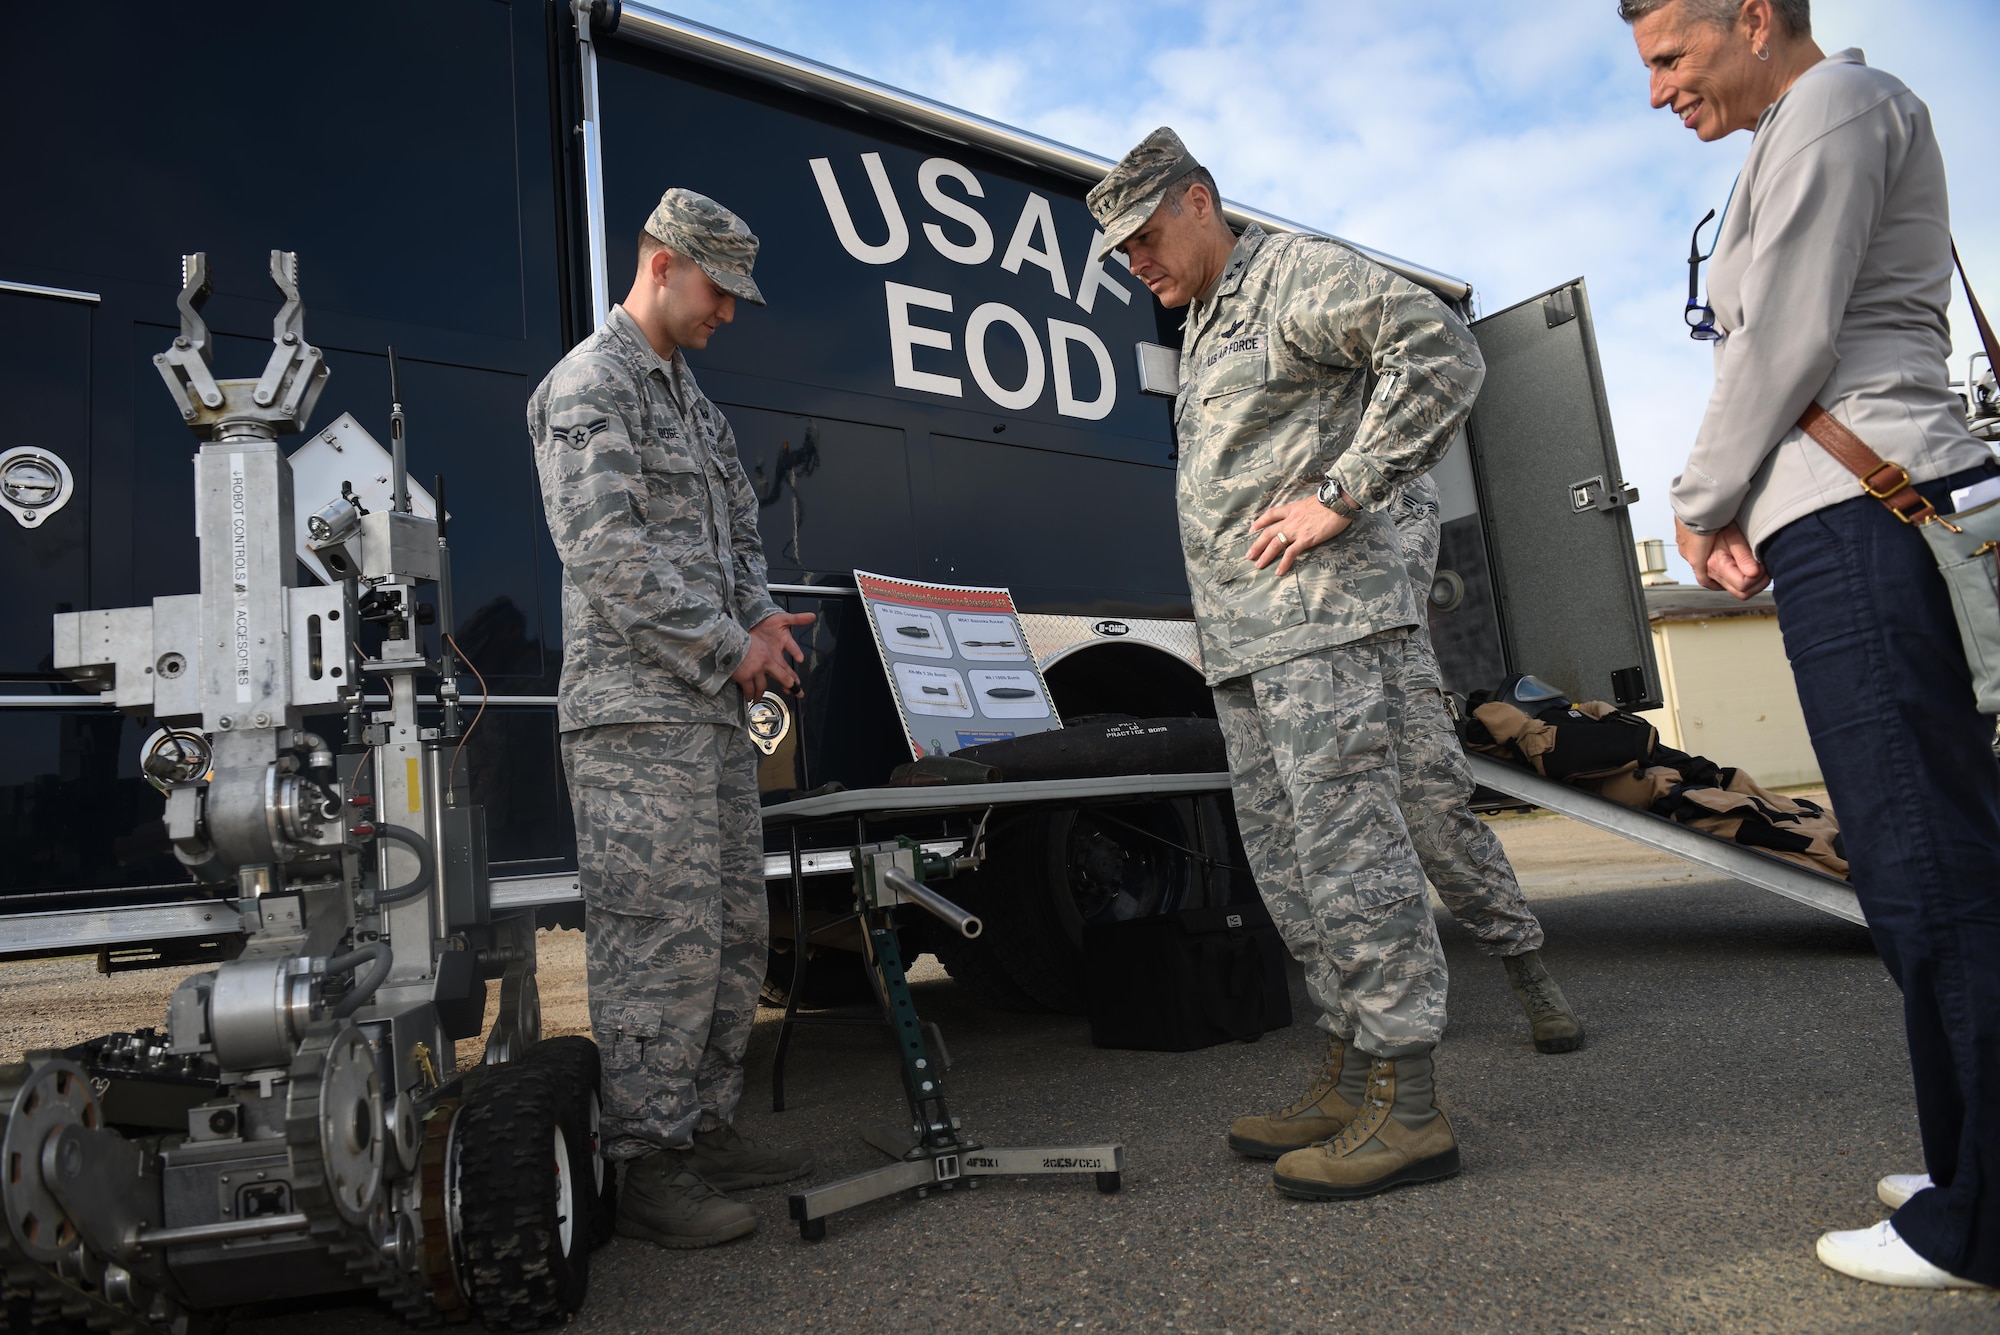 Maj. Gen. Thomas Bussiere, 8th Air Force commander, discusses robots used for Explosive Ordnance Disposal with 2 Civil Engineer Squadron EOD technicians at on Barksdale Air Force Base, La., April 21, 2017. (U.S. Air Force photo/Airman 1st Class Sydney Bennett)